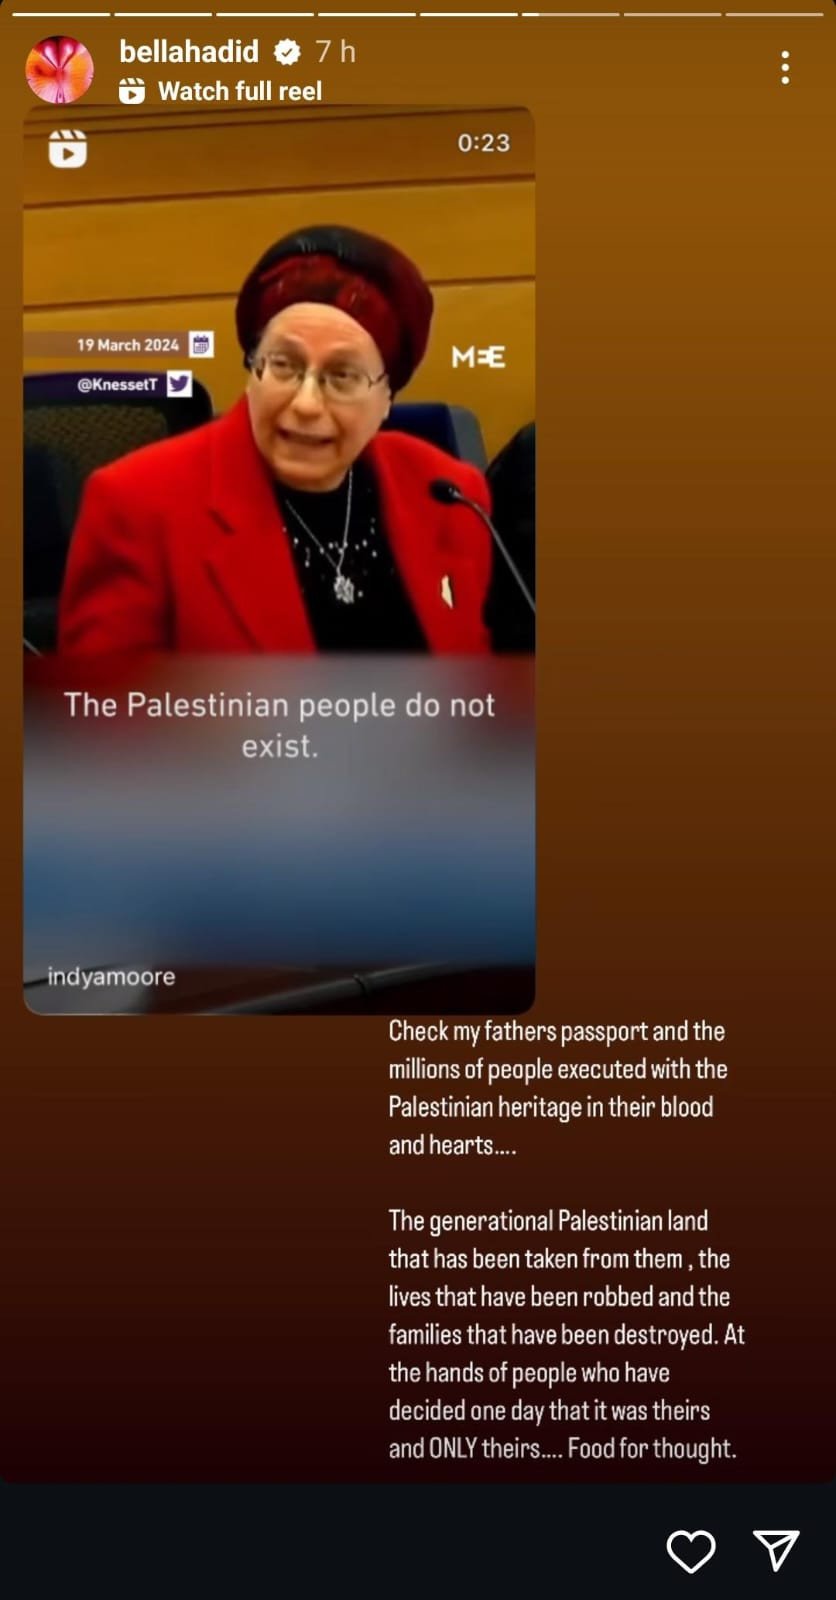 Israeli Minister's claim that there are no Palestinians gets criticized by Bella Hadid